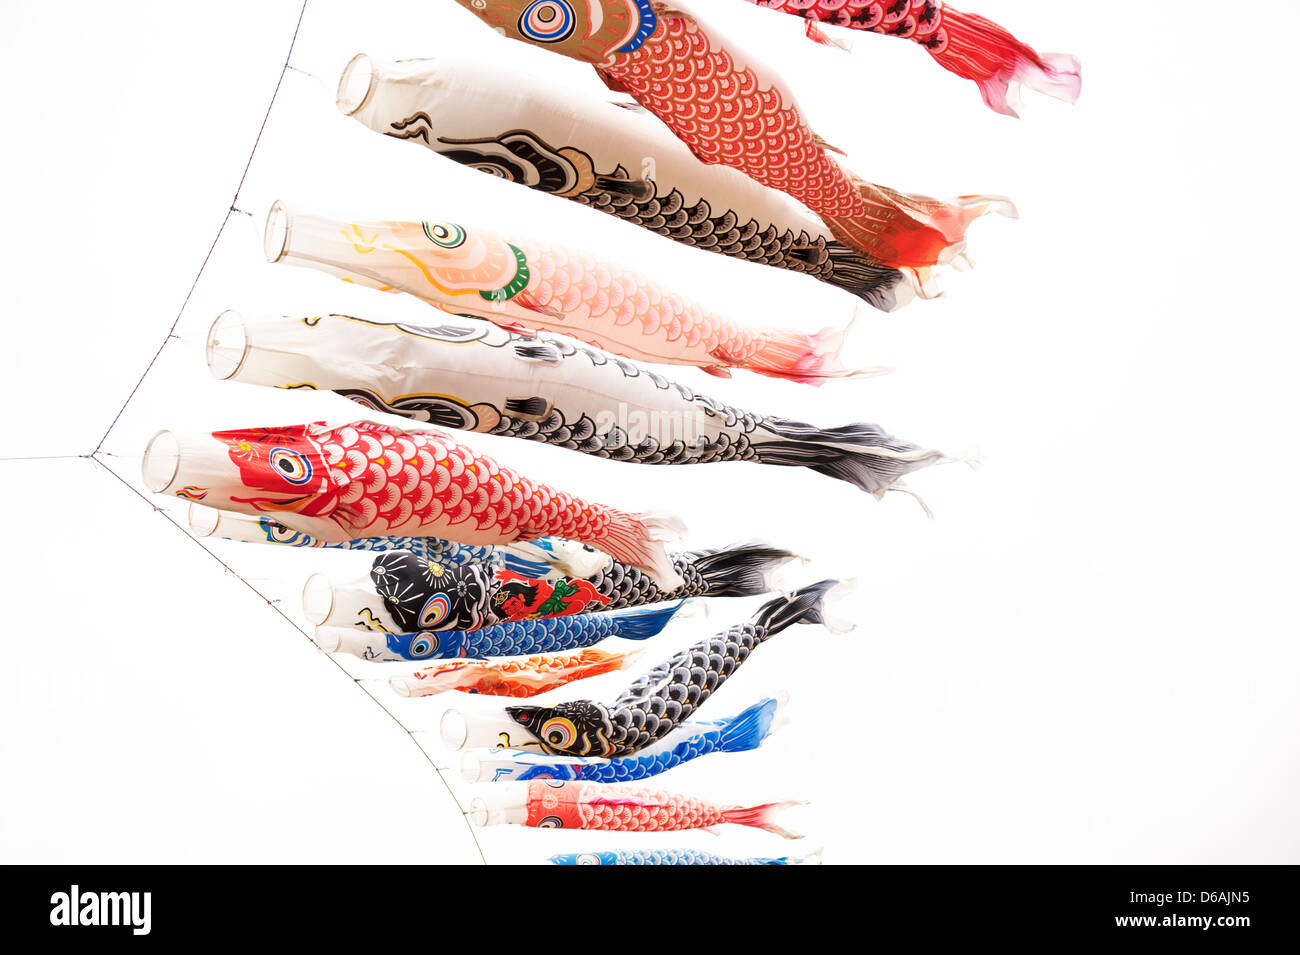 Koinobori (carp streamers) fly against a white backdrop for Children's Day in May in Japan. Stock Photo